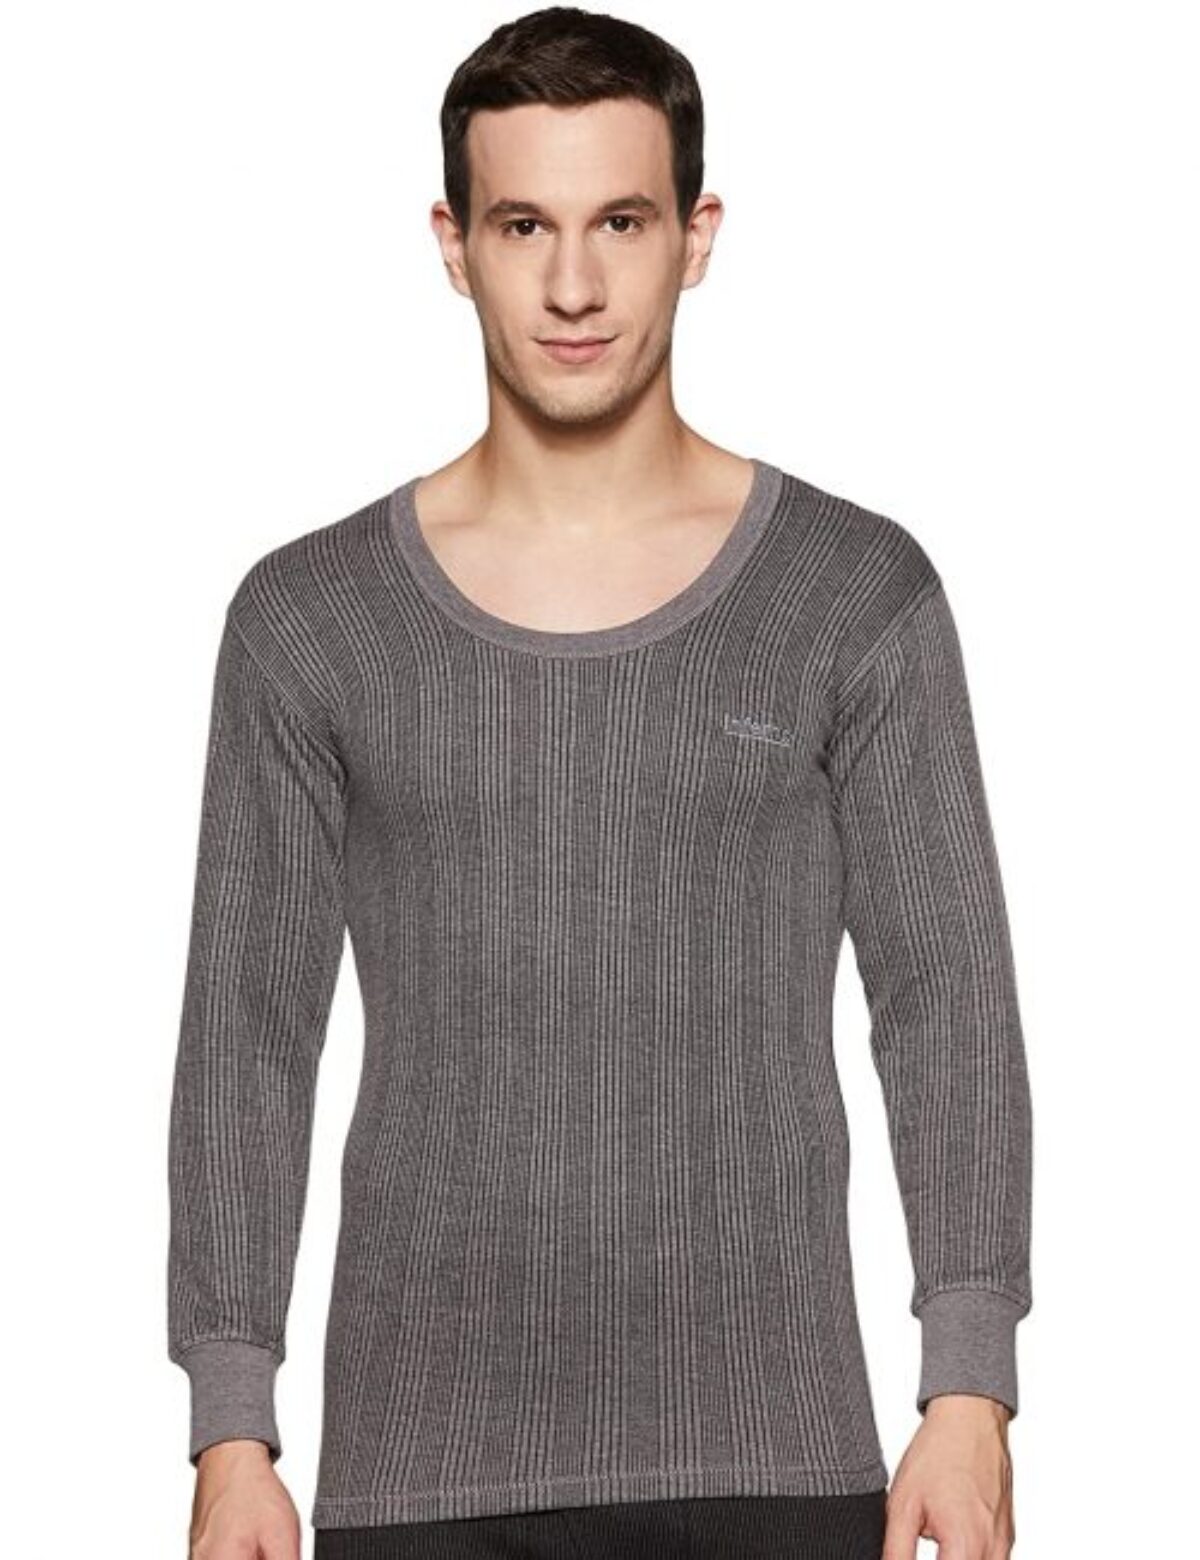 Buy lux inferno mens thermal wear at best price in India 